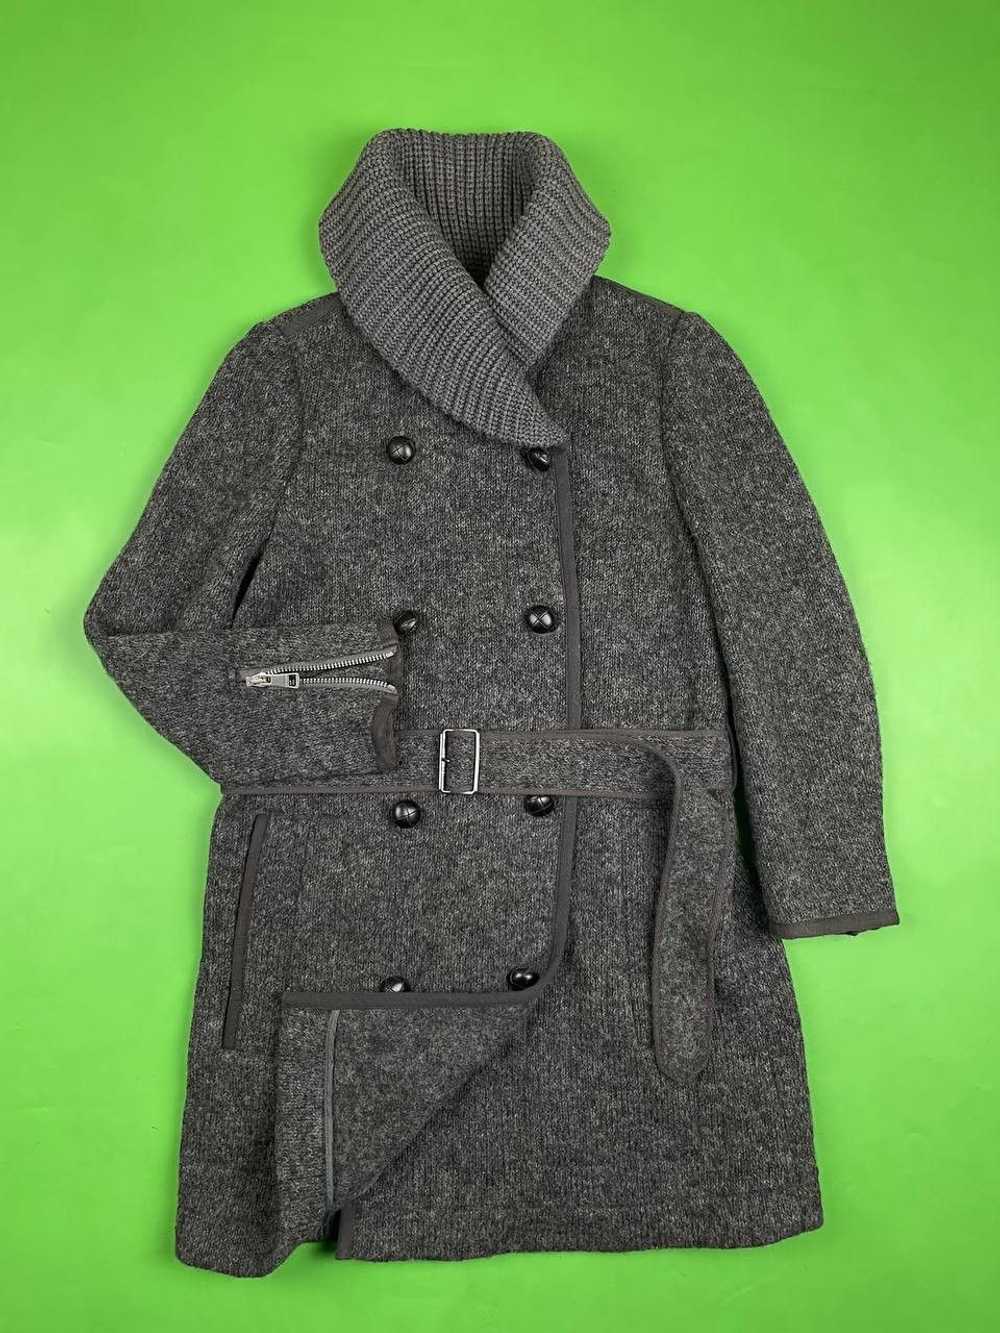 Burberry BURBERRY BRIT Wool Grey Double-Breasted … - image 2